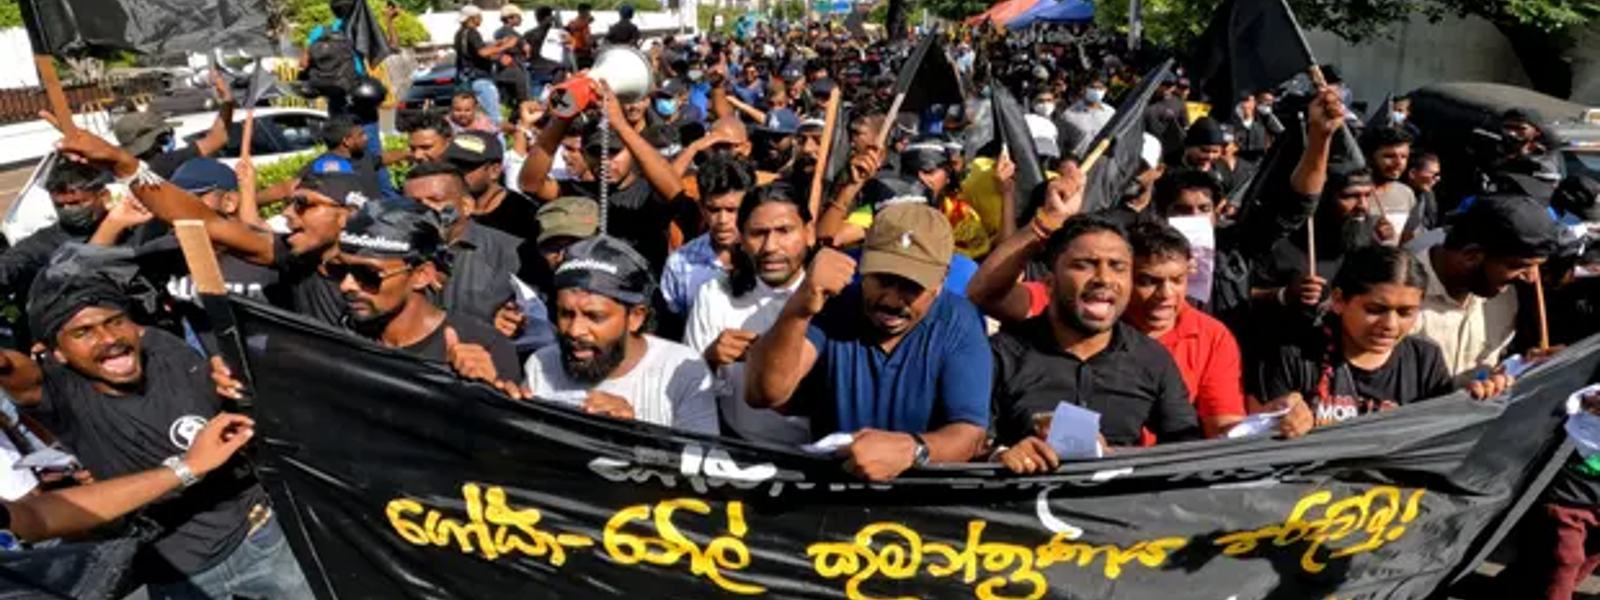 Sri Lanka must respect people’s rights to protest – UN